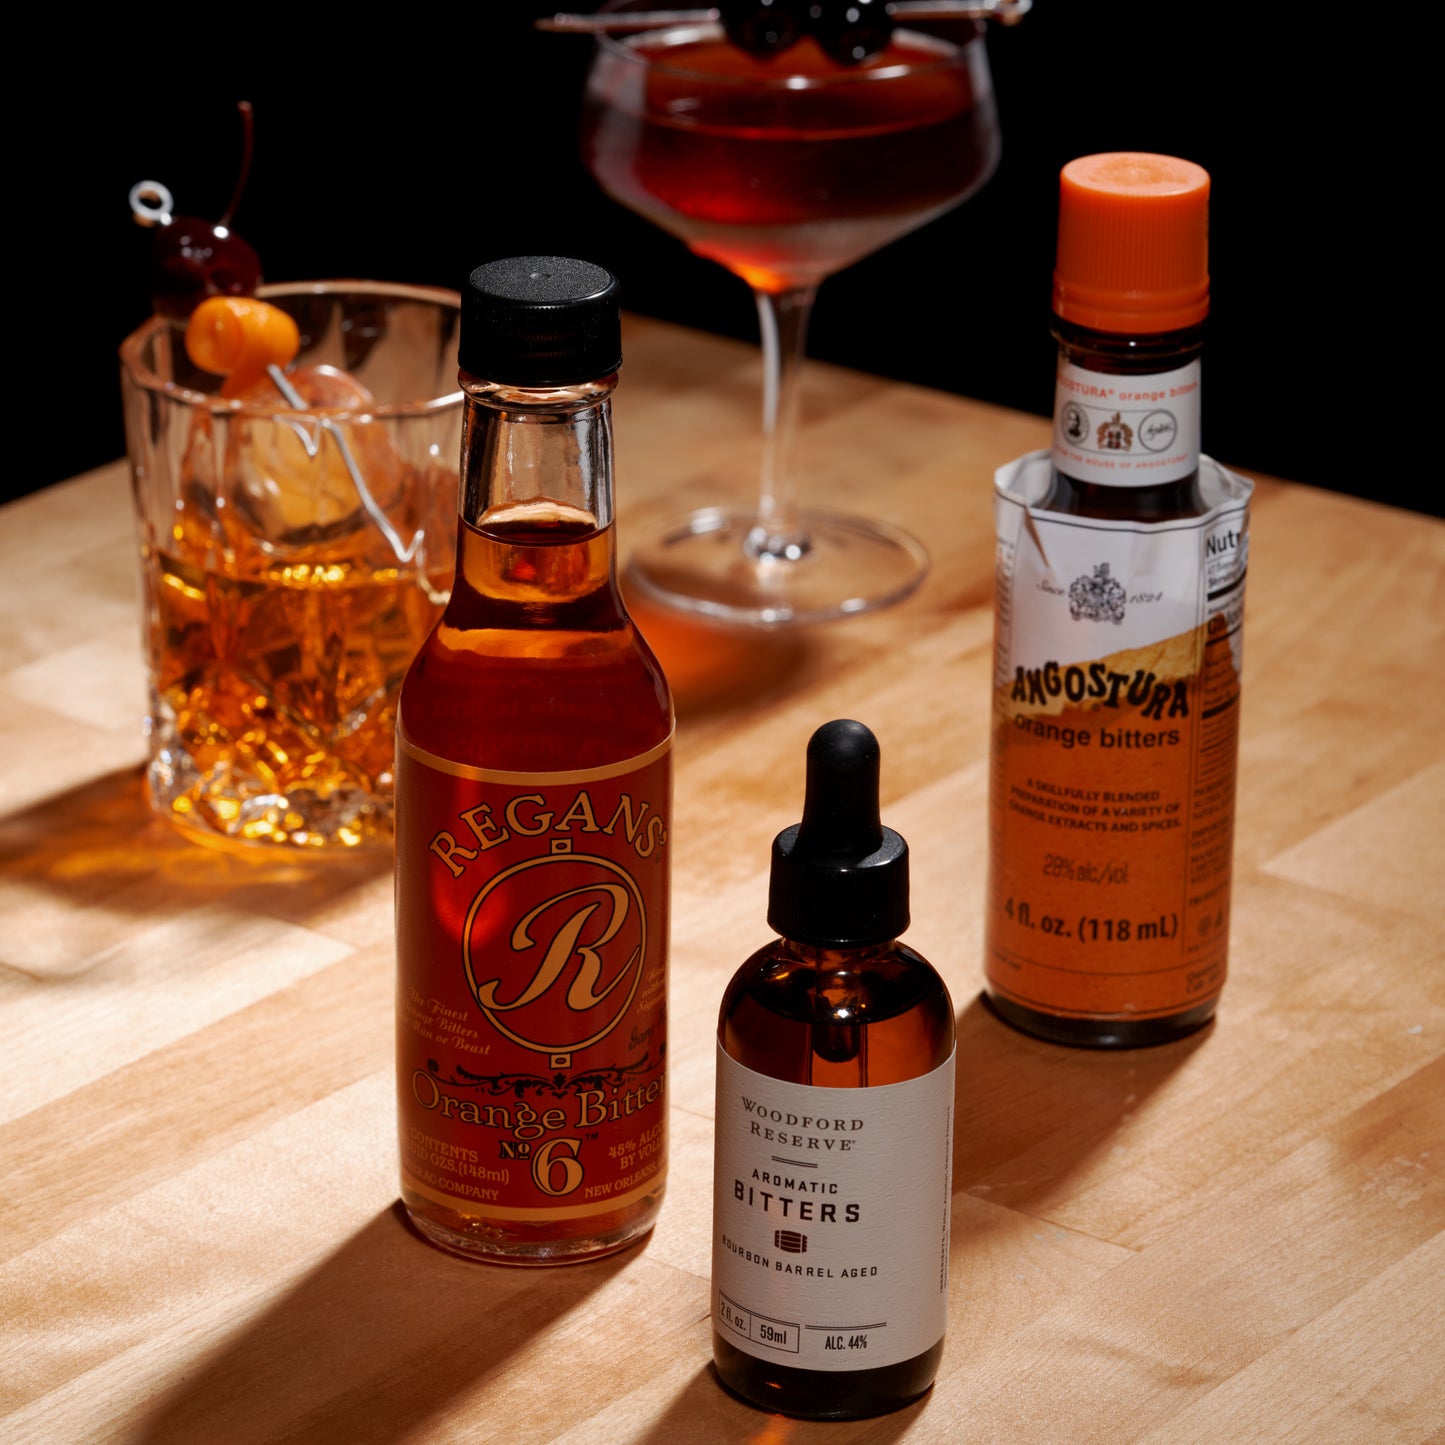 Woodford Reserve Bitters Aromatic